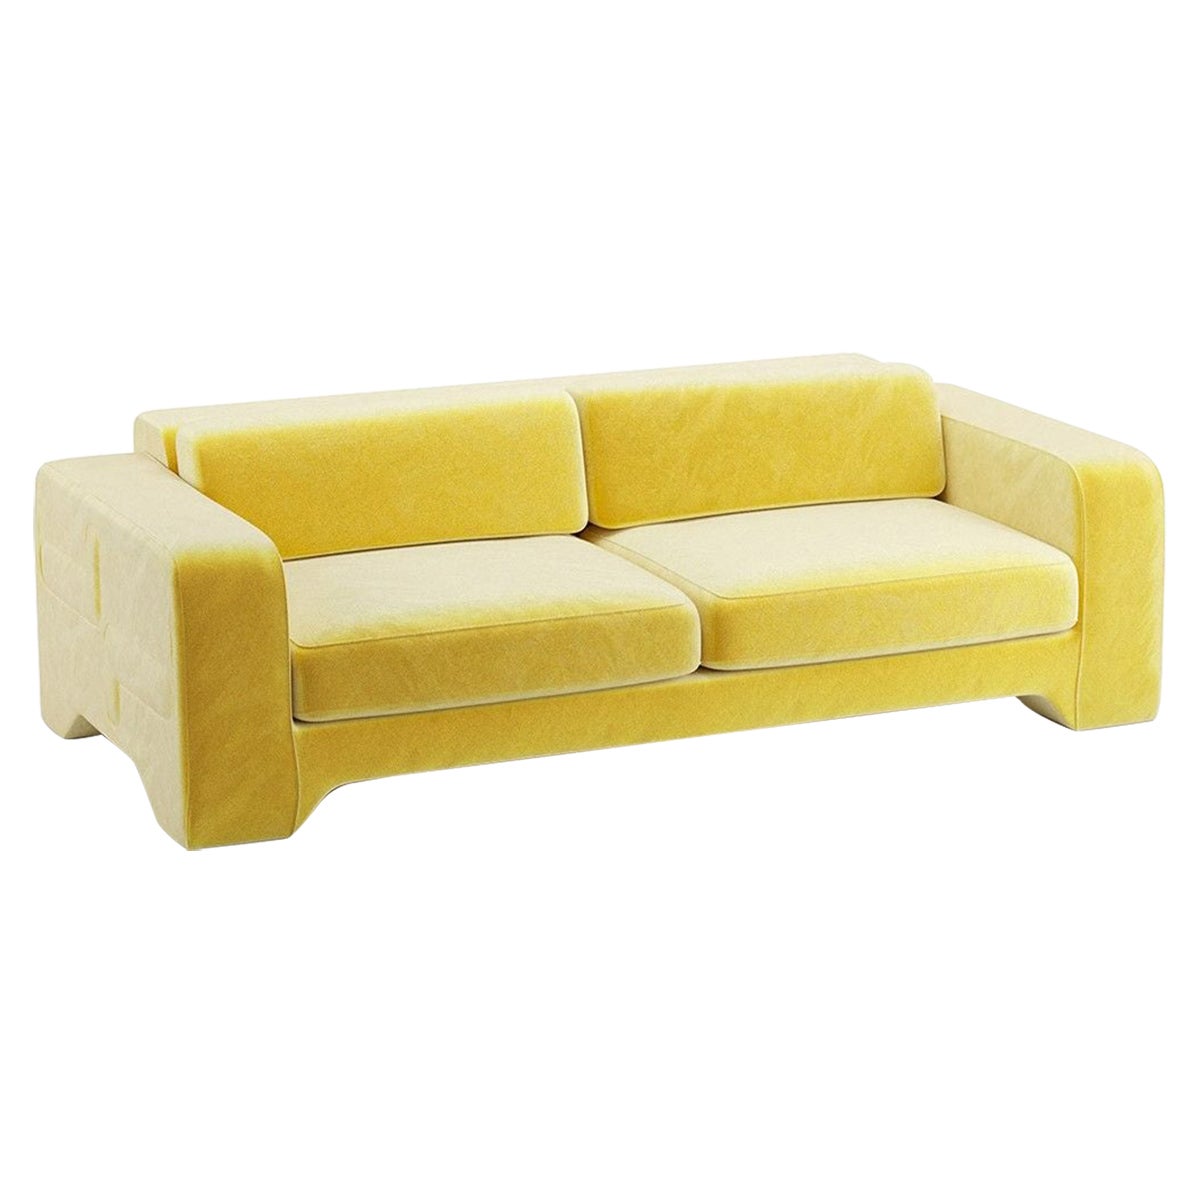 Popus Editions Giovanna 3 Seater Sofa in Yellow Como Velvet Upholstery